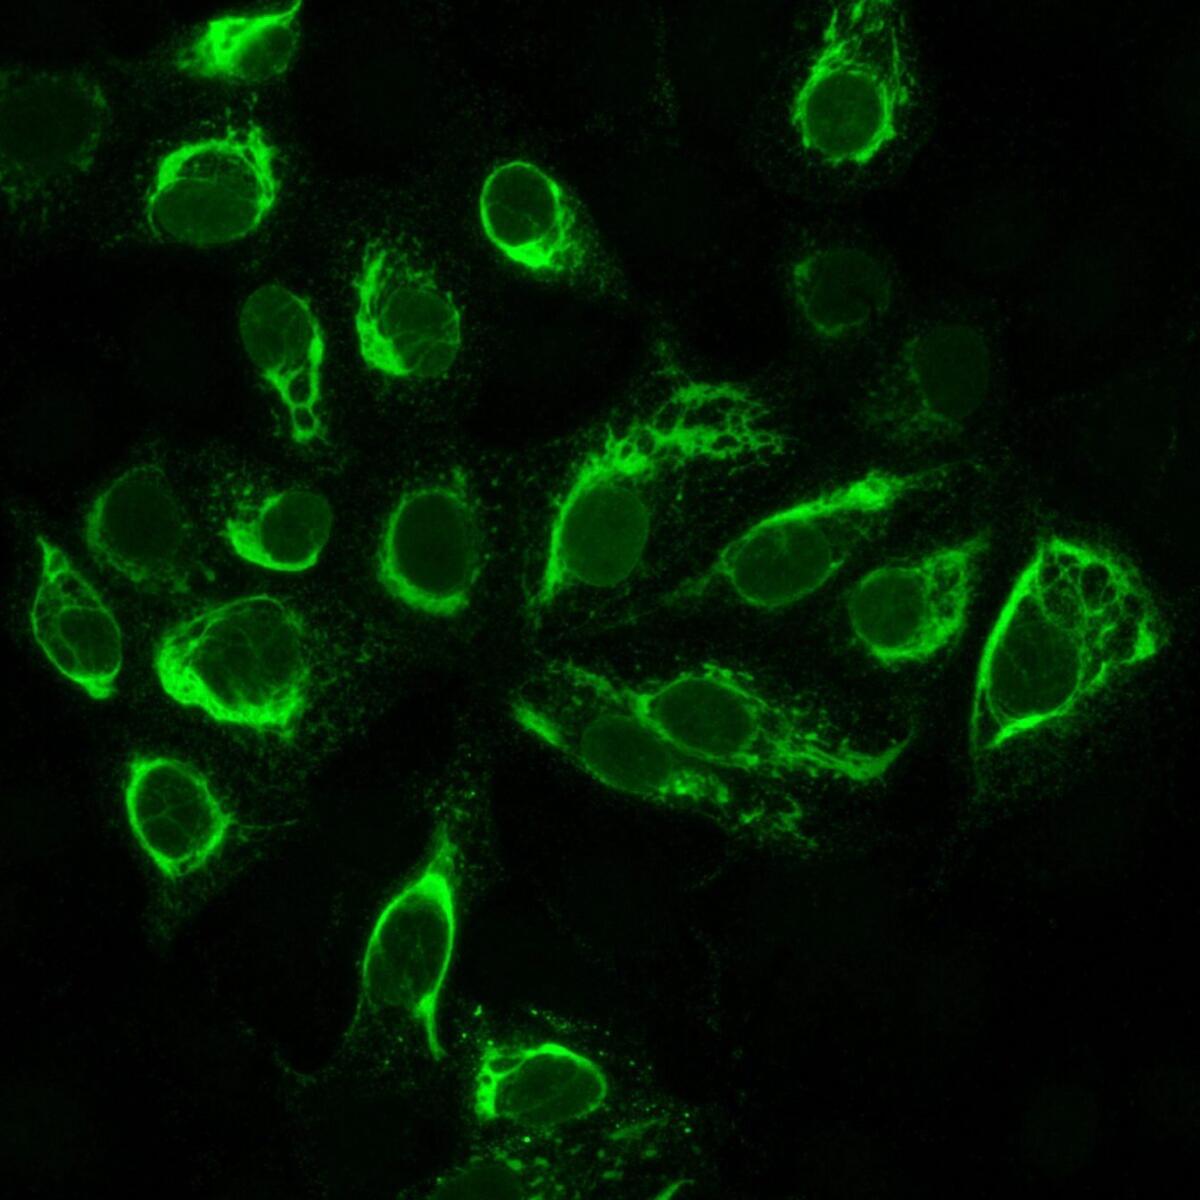 Cultured cells that have been infected with the Zika virus, viewed under a microscope. The cells appear green only if they are infected.